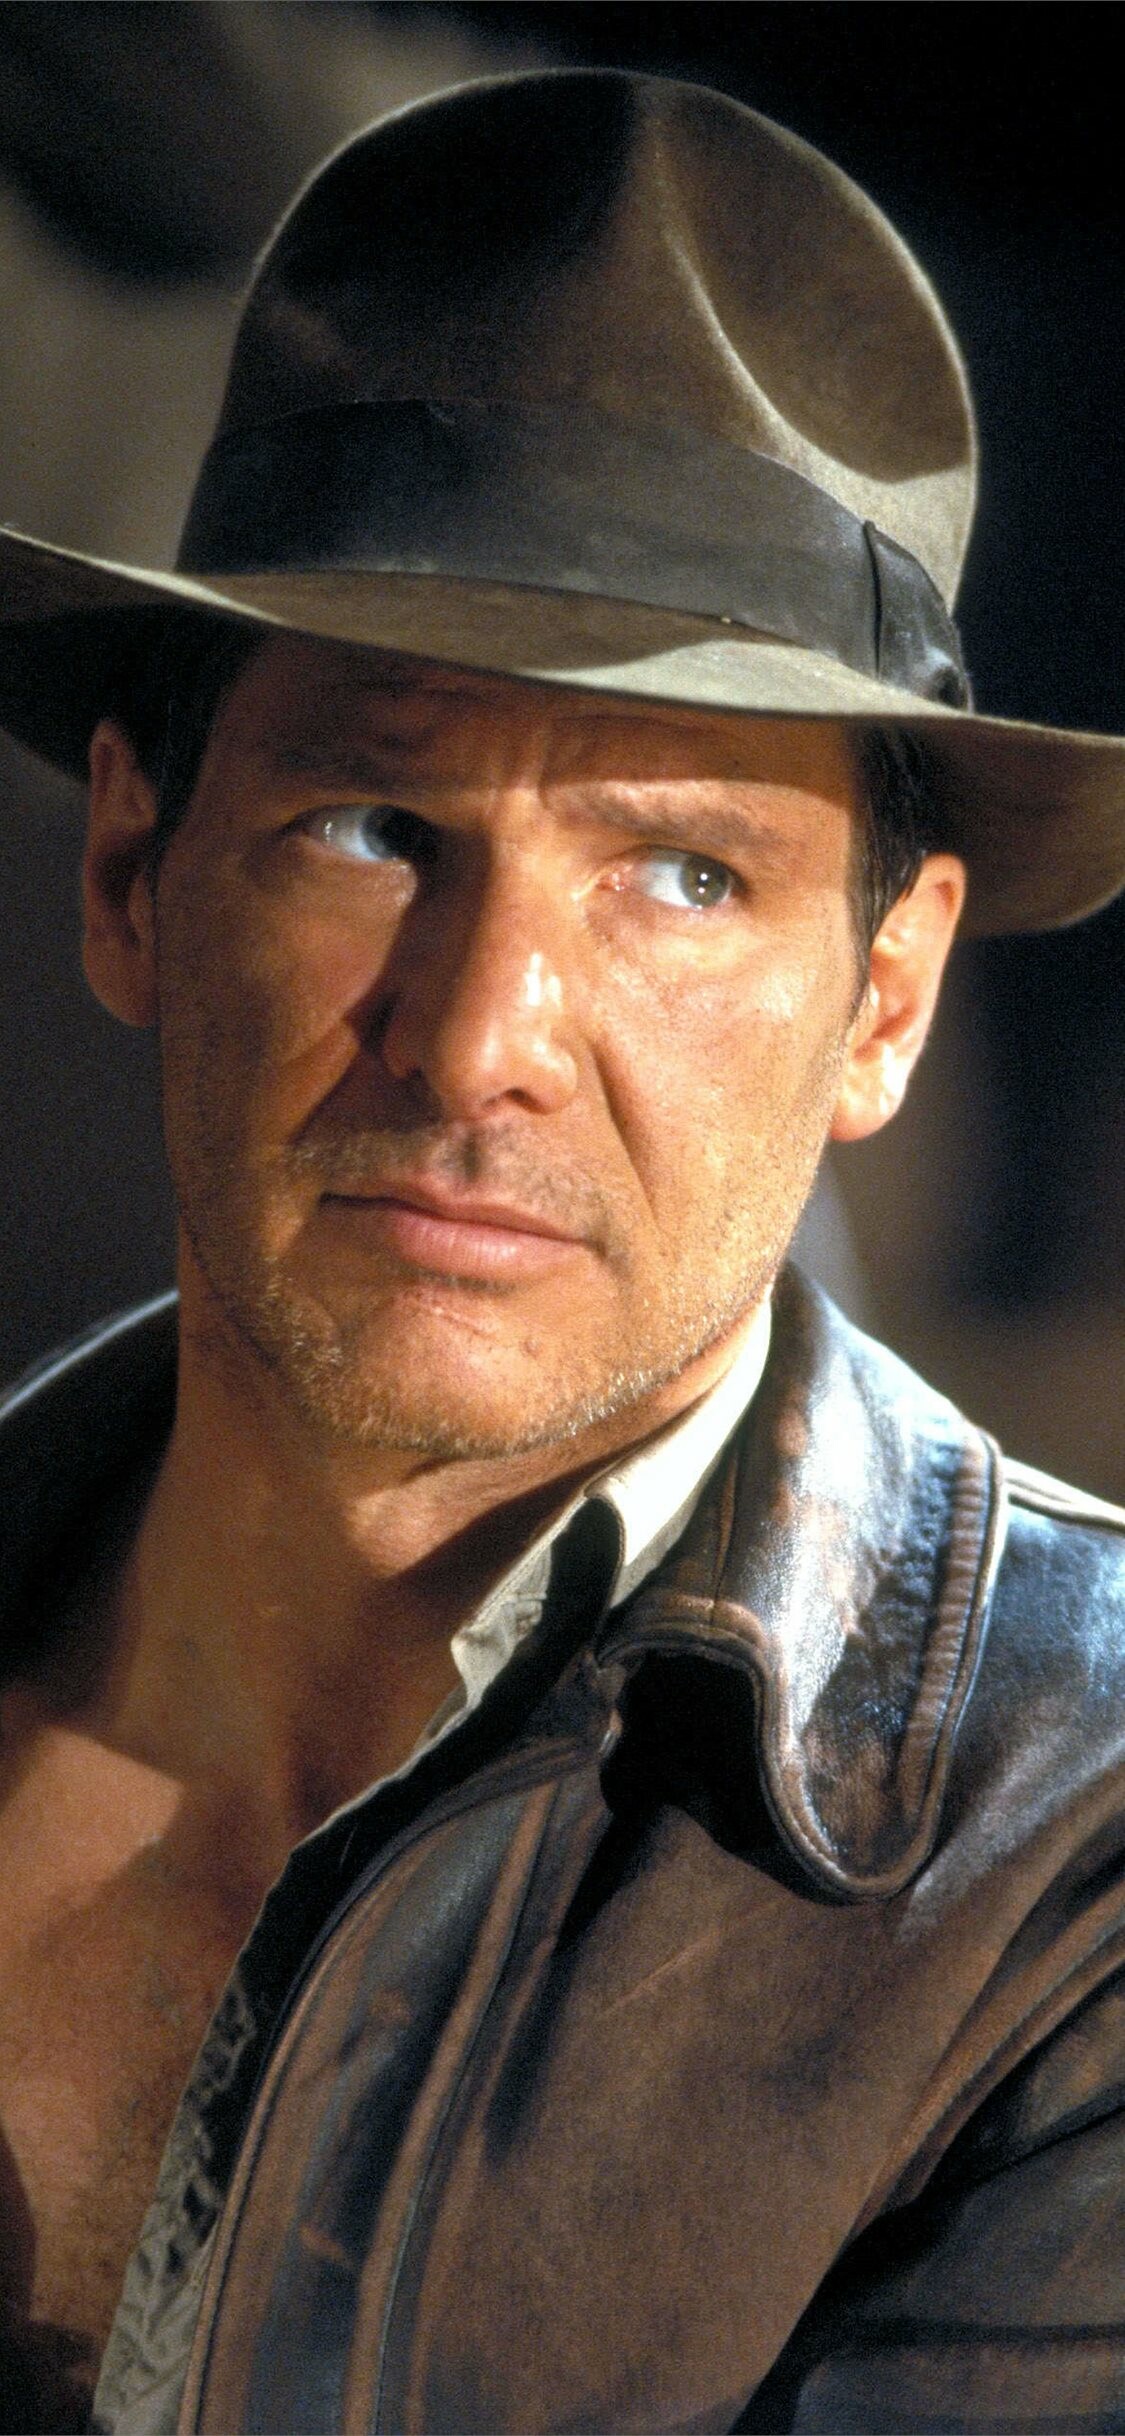 Indiana Jones: Harrison Ford as the archaeologist professor and adventurer, The Last Crusade. 1130x2440 HD Wallpaper.